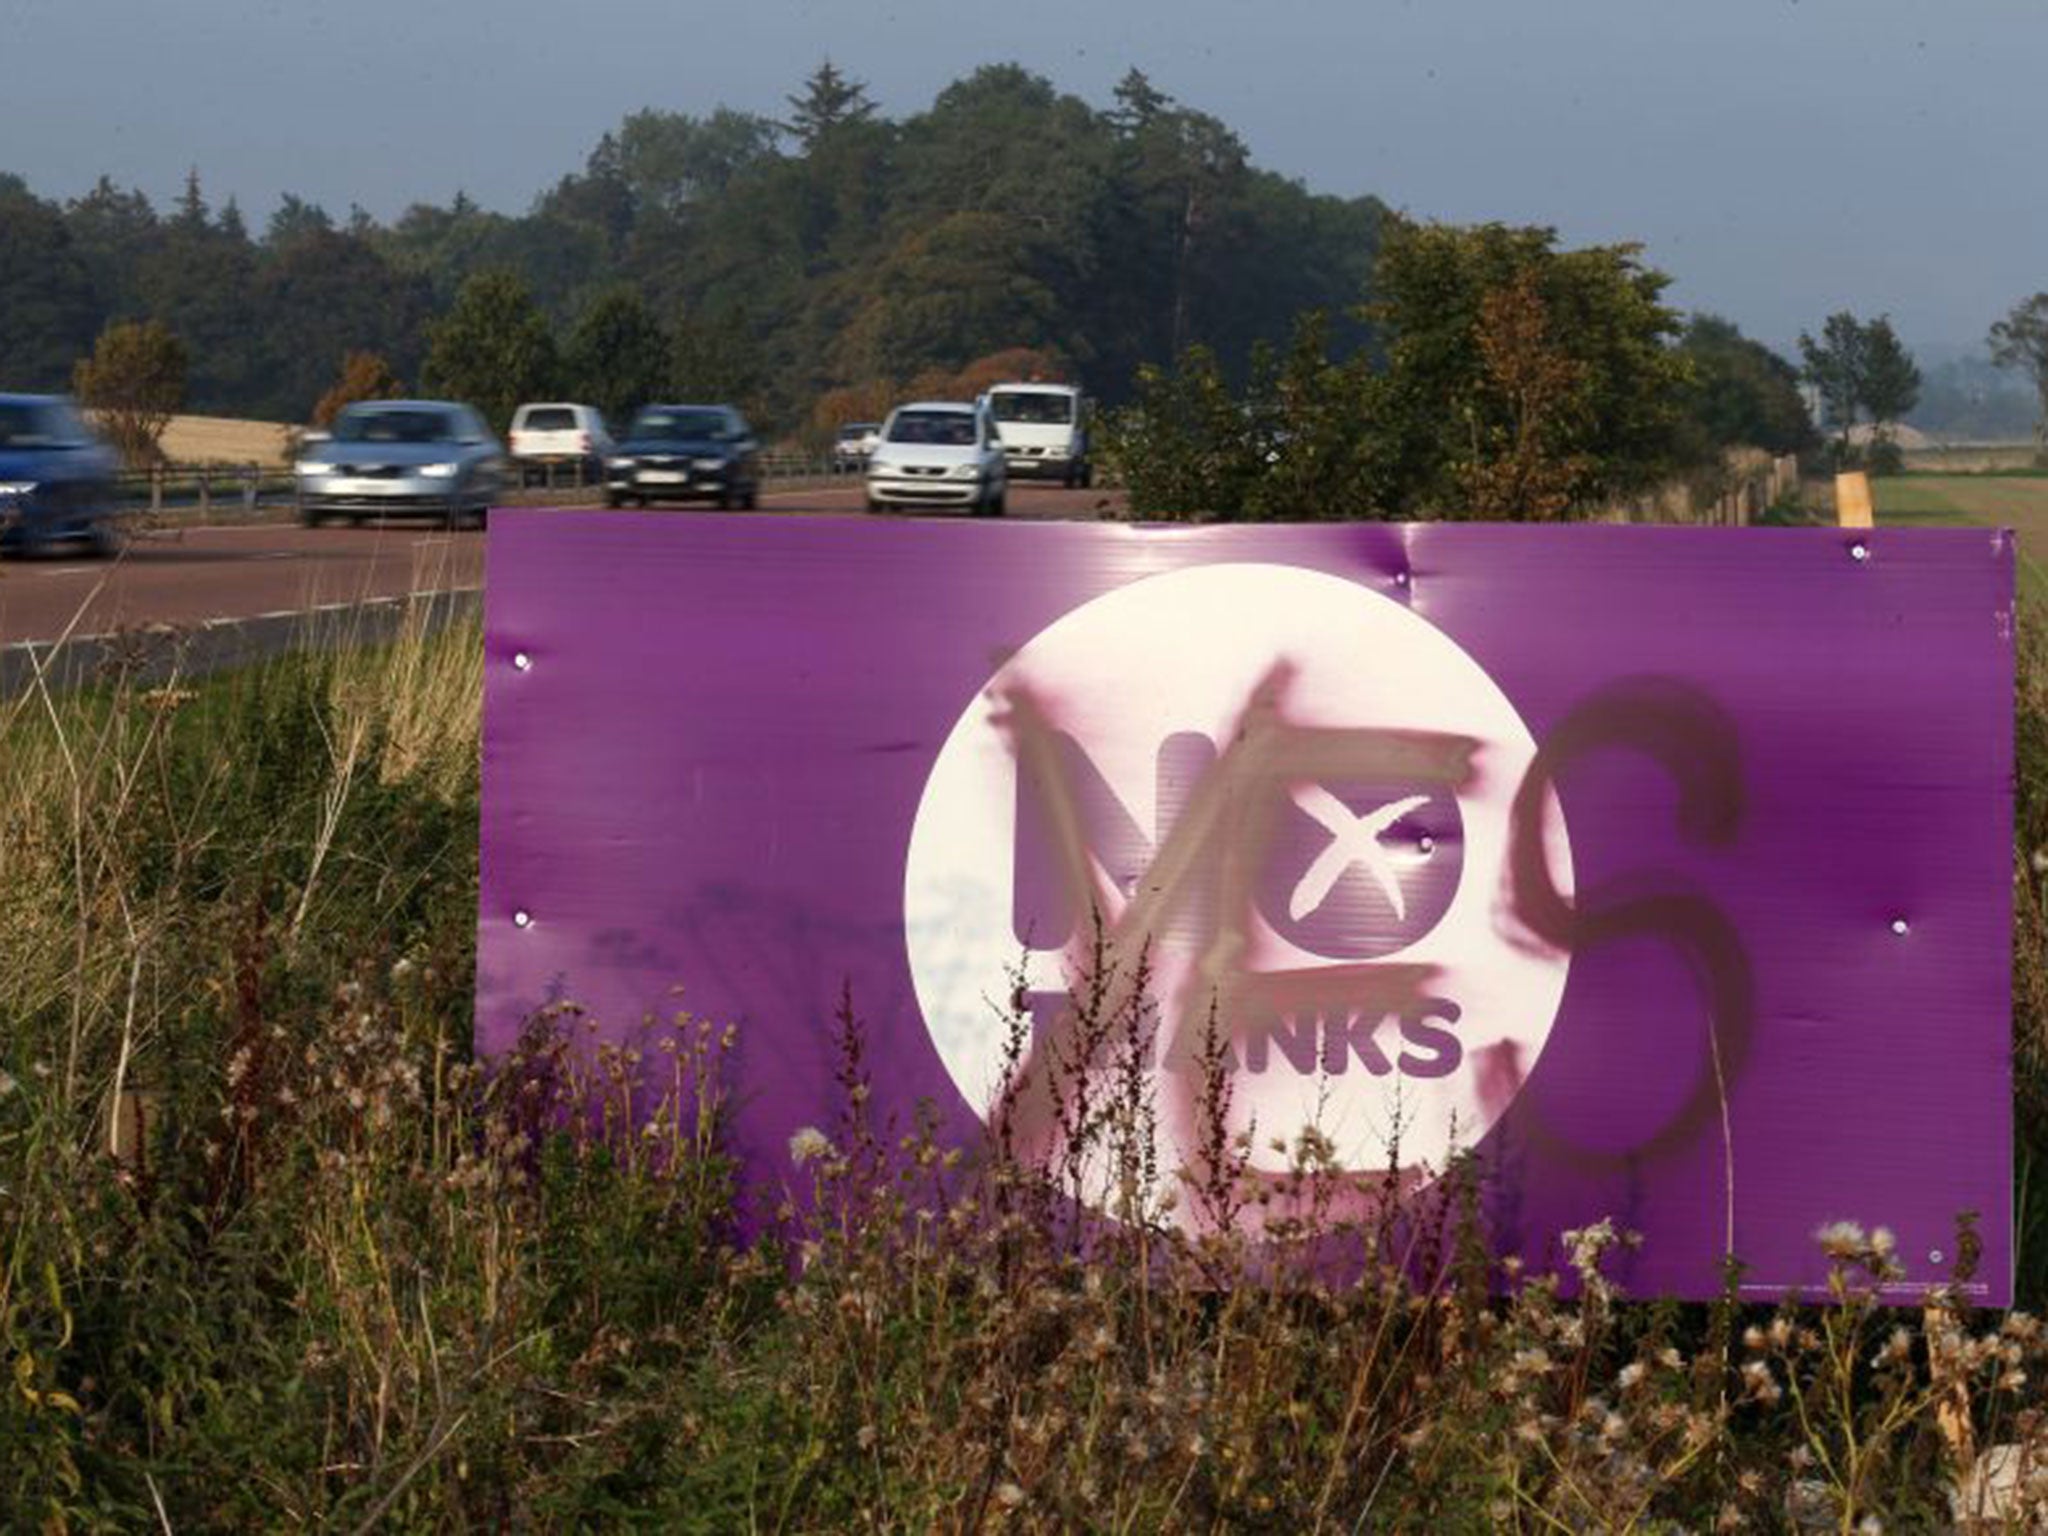 A graffitied Scottish Referendum sign on the A90 road near Dundee. The city has earned the label of Yes City for its allegedly rock-solid support for independence